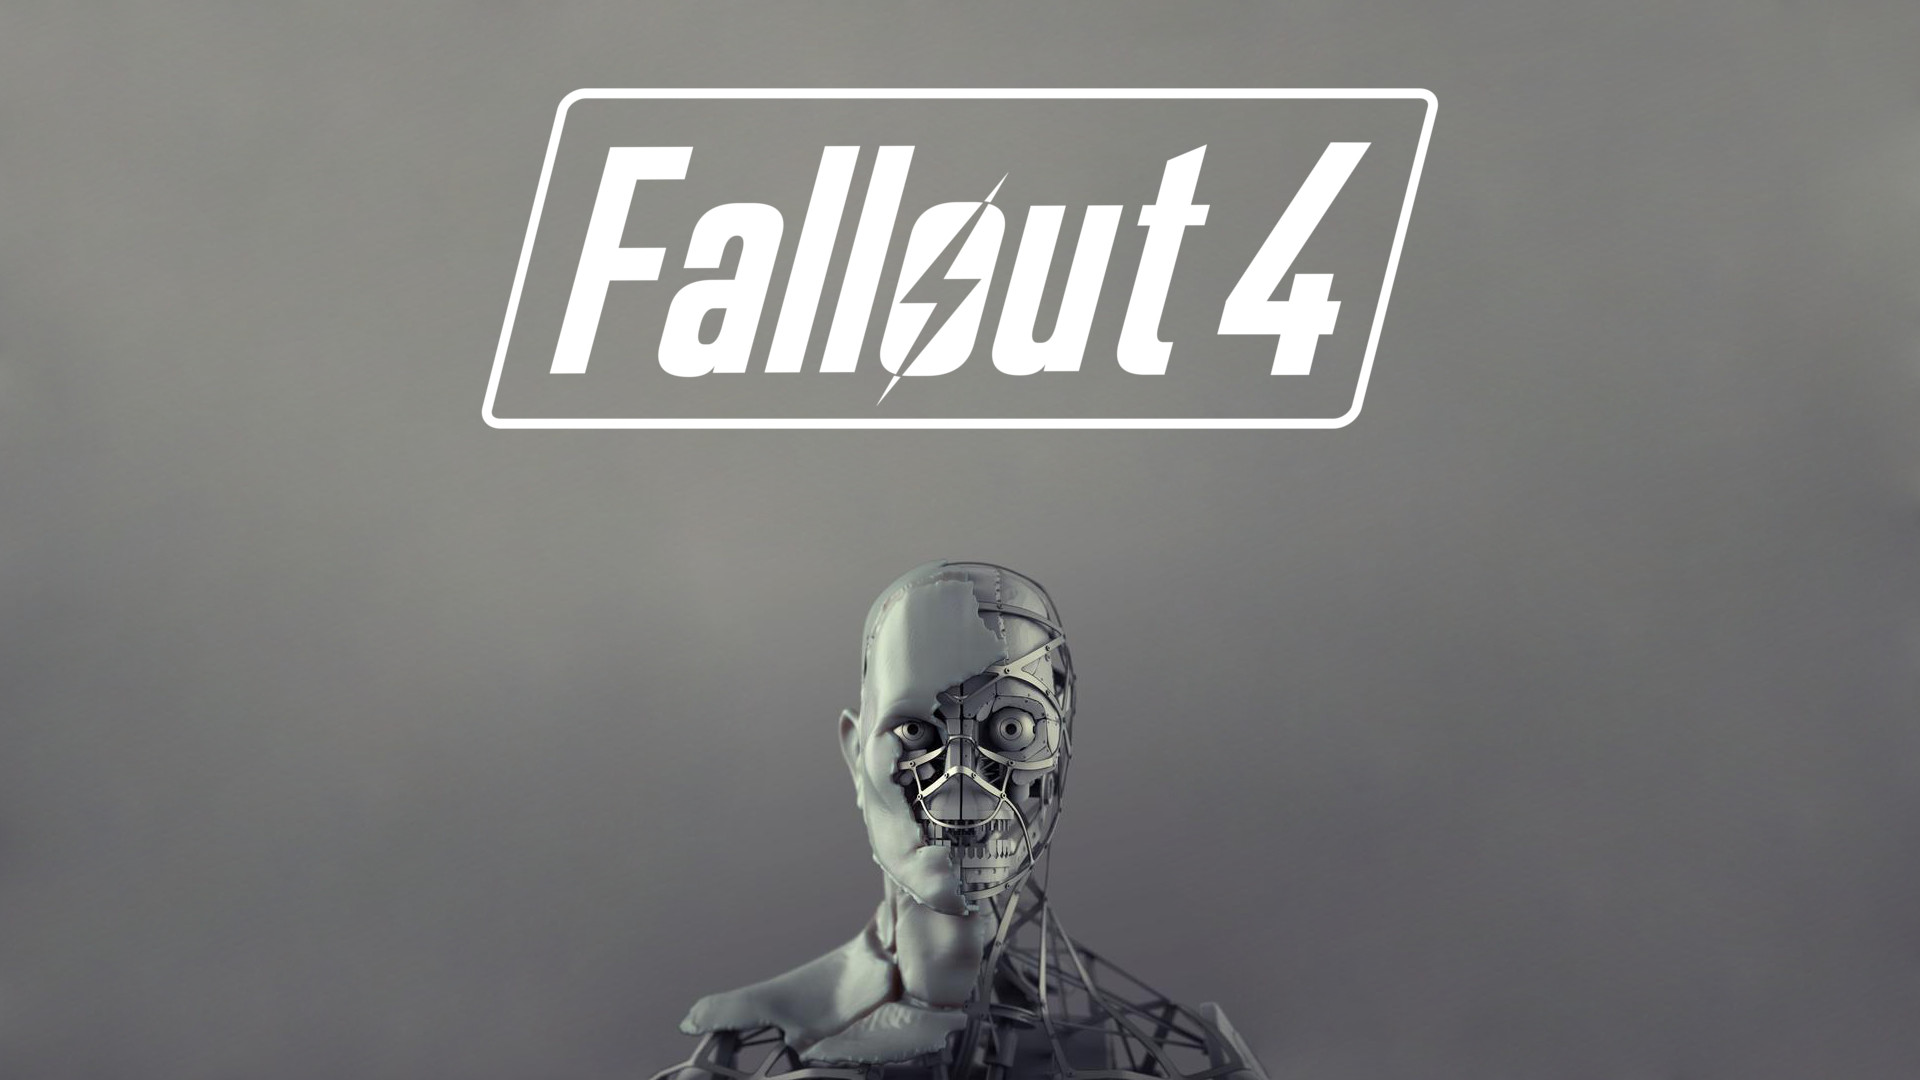 Fallout 4 Synth 2. Download here